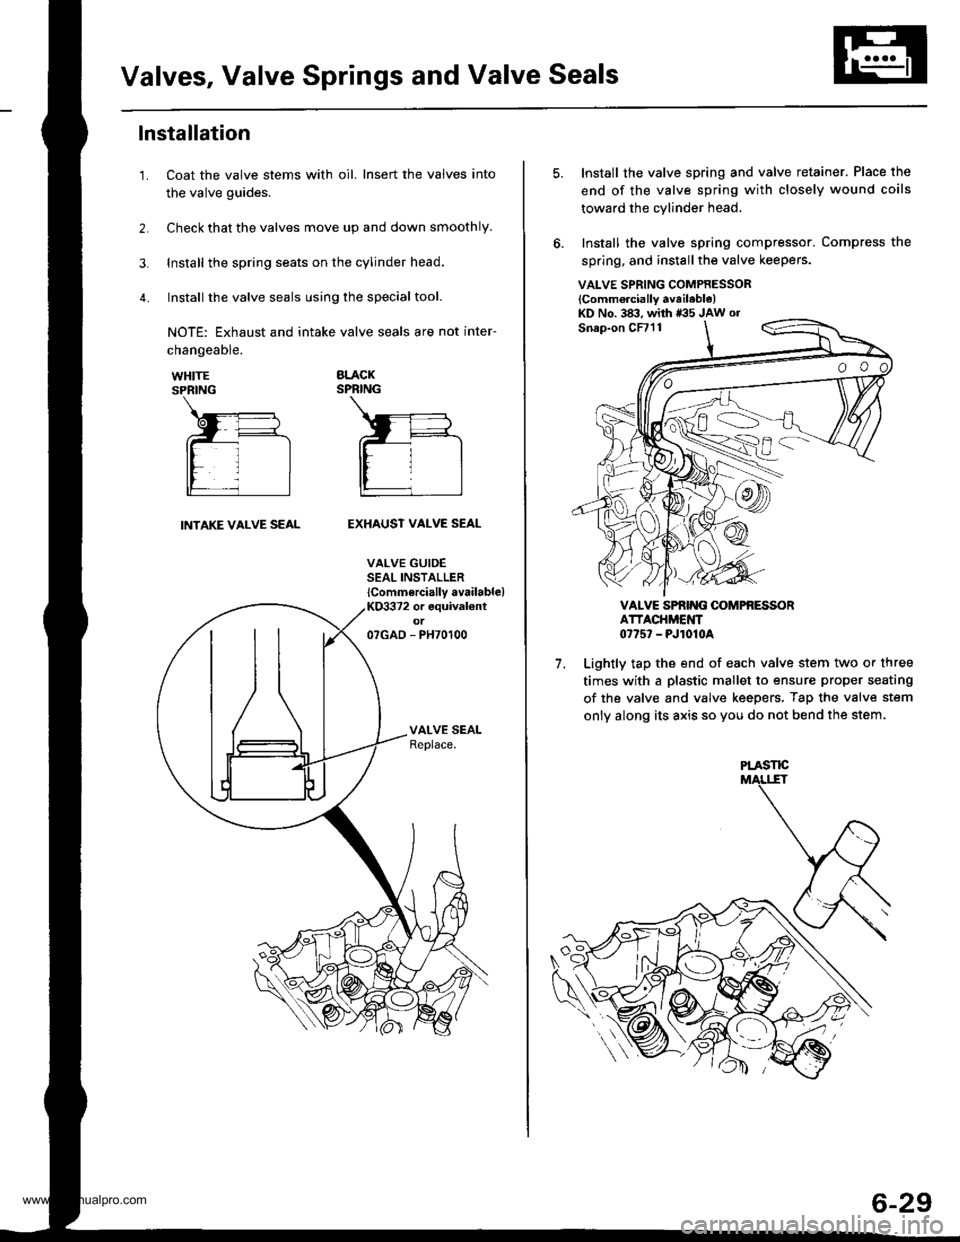 HONDA CR-V 1998 RD1-RD3 / 1.G Workshop Manual 
Valves, Valve Springs and Valve Seals
lnstallation
Coat the valve stems with oil. Insert the valves into
the valve guides.
Check that the valves move up and down smoothly.
Install the spring seats on